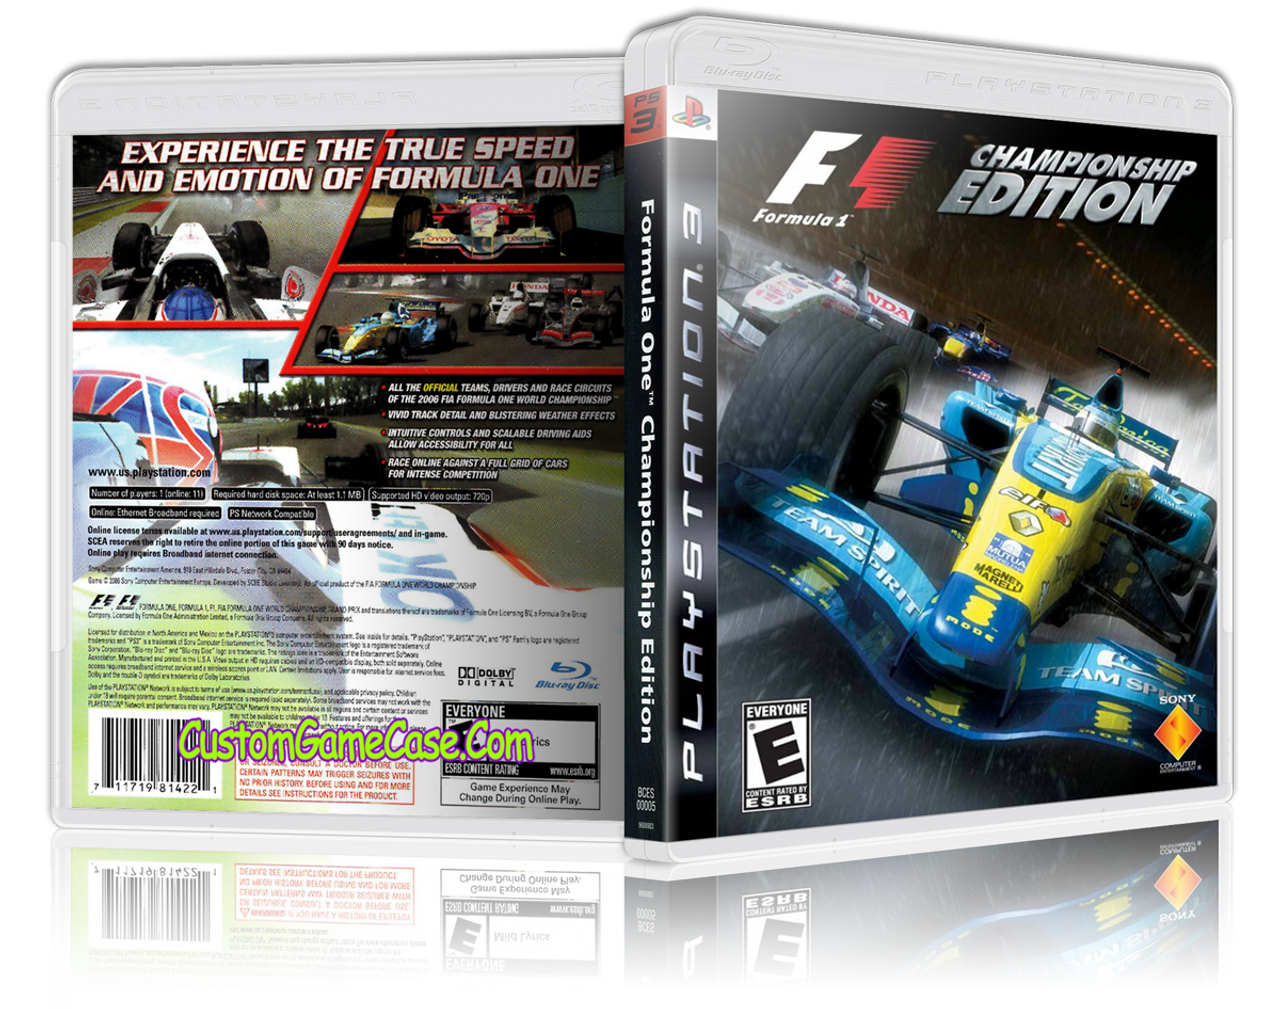 Structureel de wind is sterk Samengesteld F1 Formula 1 Championship Edition - Sony PlayStation 3 PS3 - Empty Custom  Replacement Case - Custom Game Case